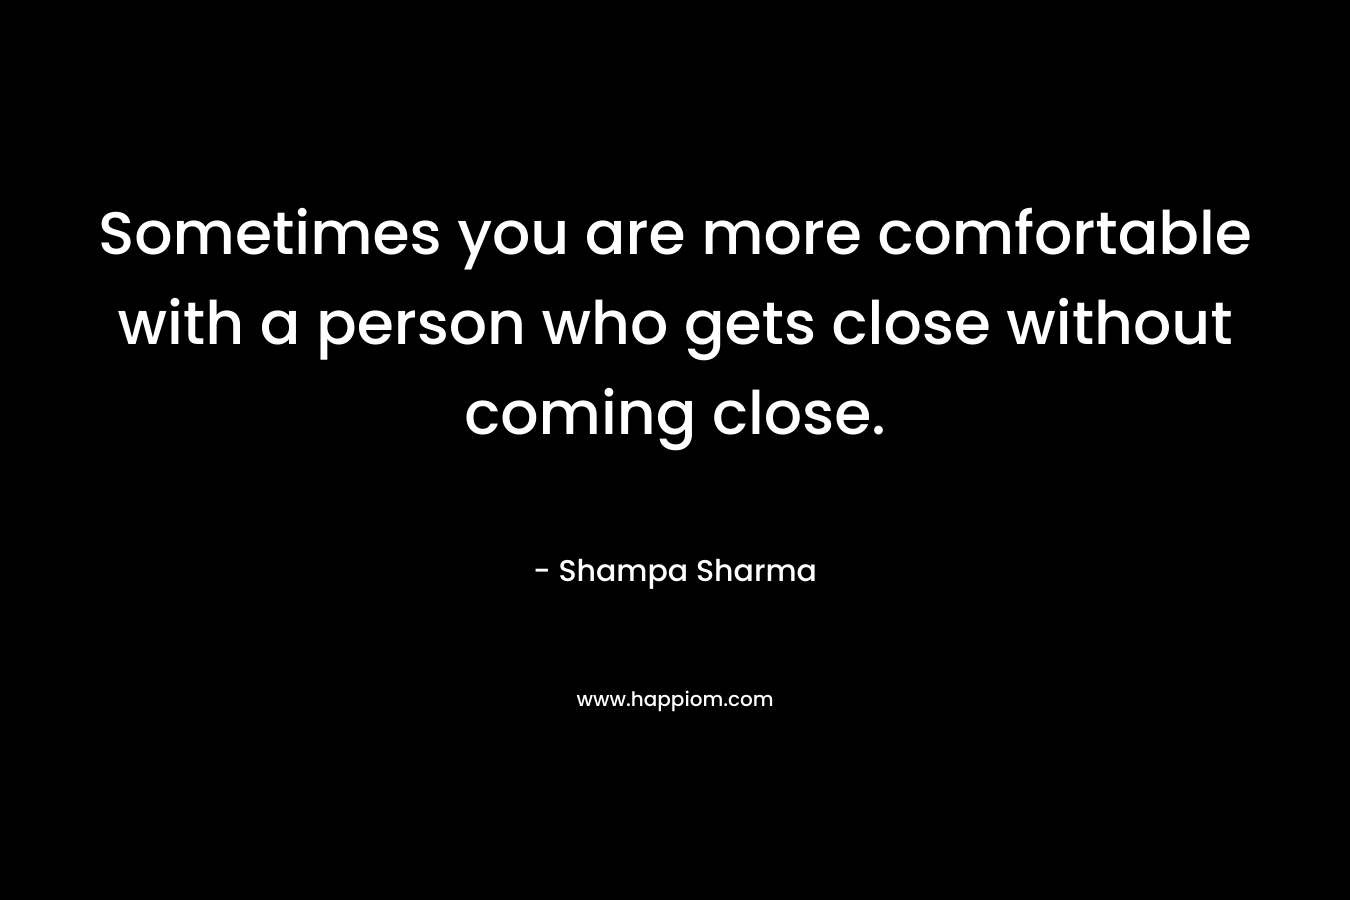 Sometimes you are more comfortable with a person who gets close without coming close.